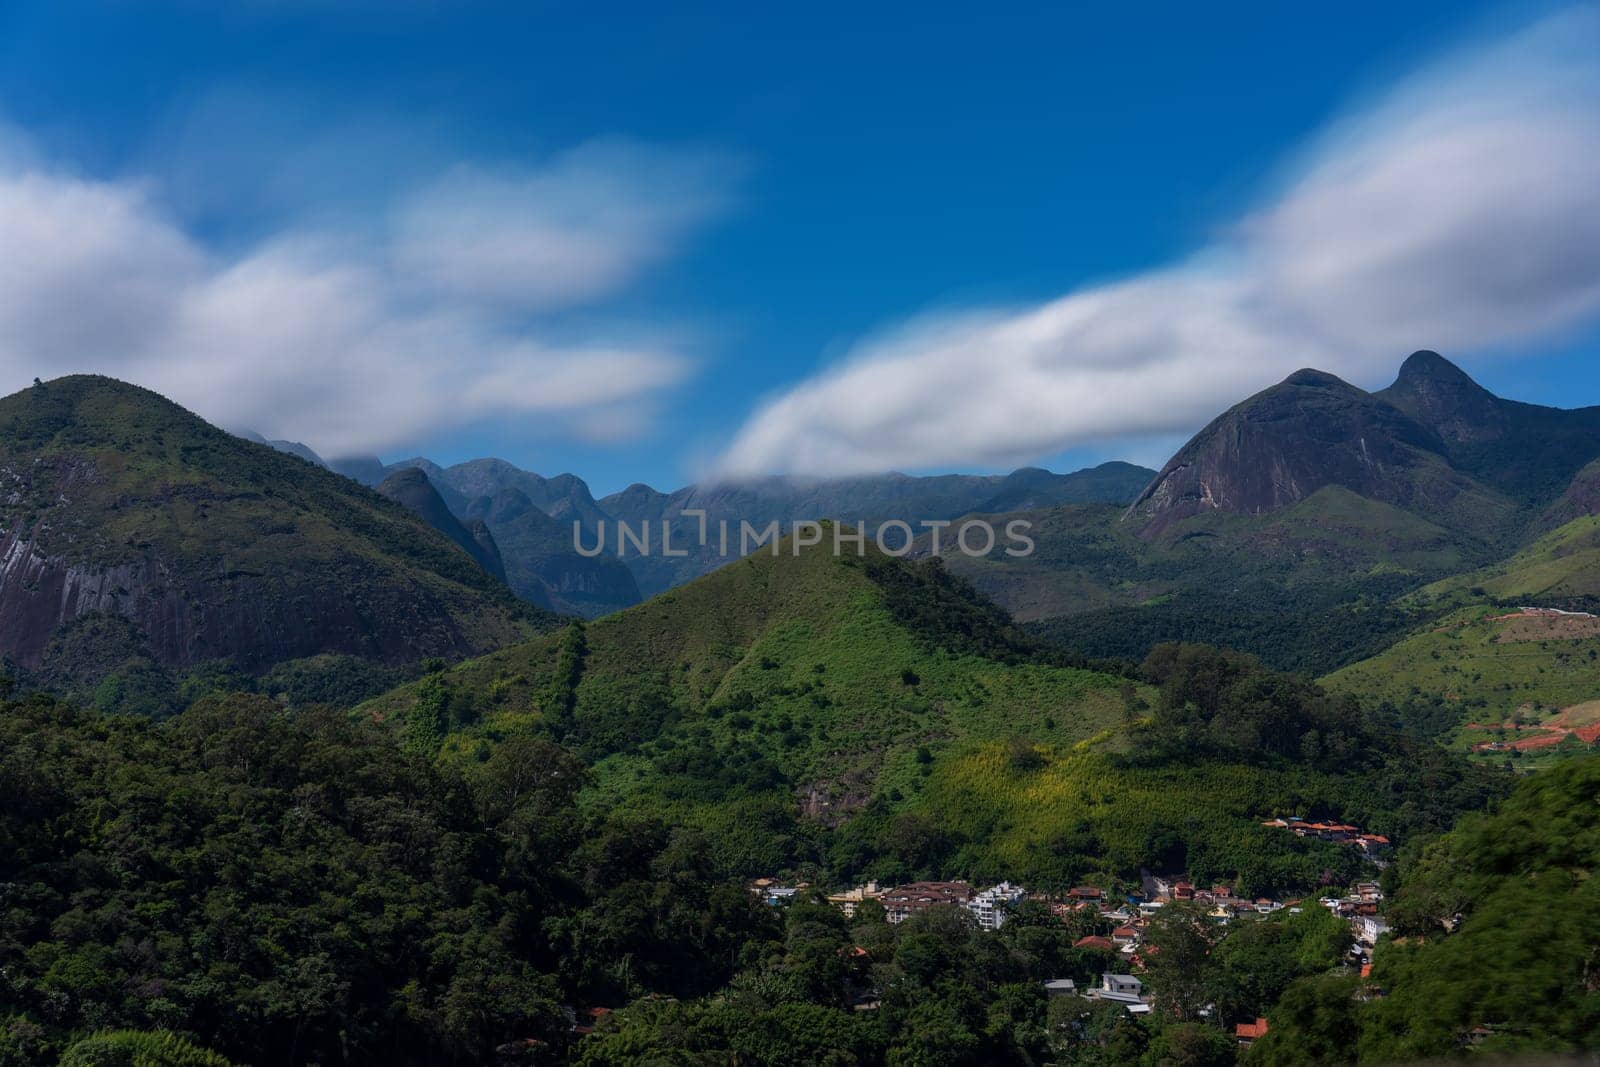 Impressive Petropolis Mountains with Blurry Clouds and Rural Village by FerradalFCG